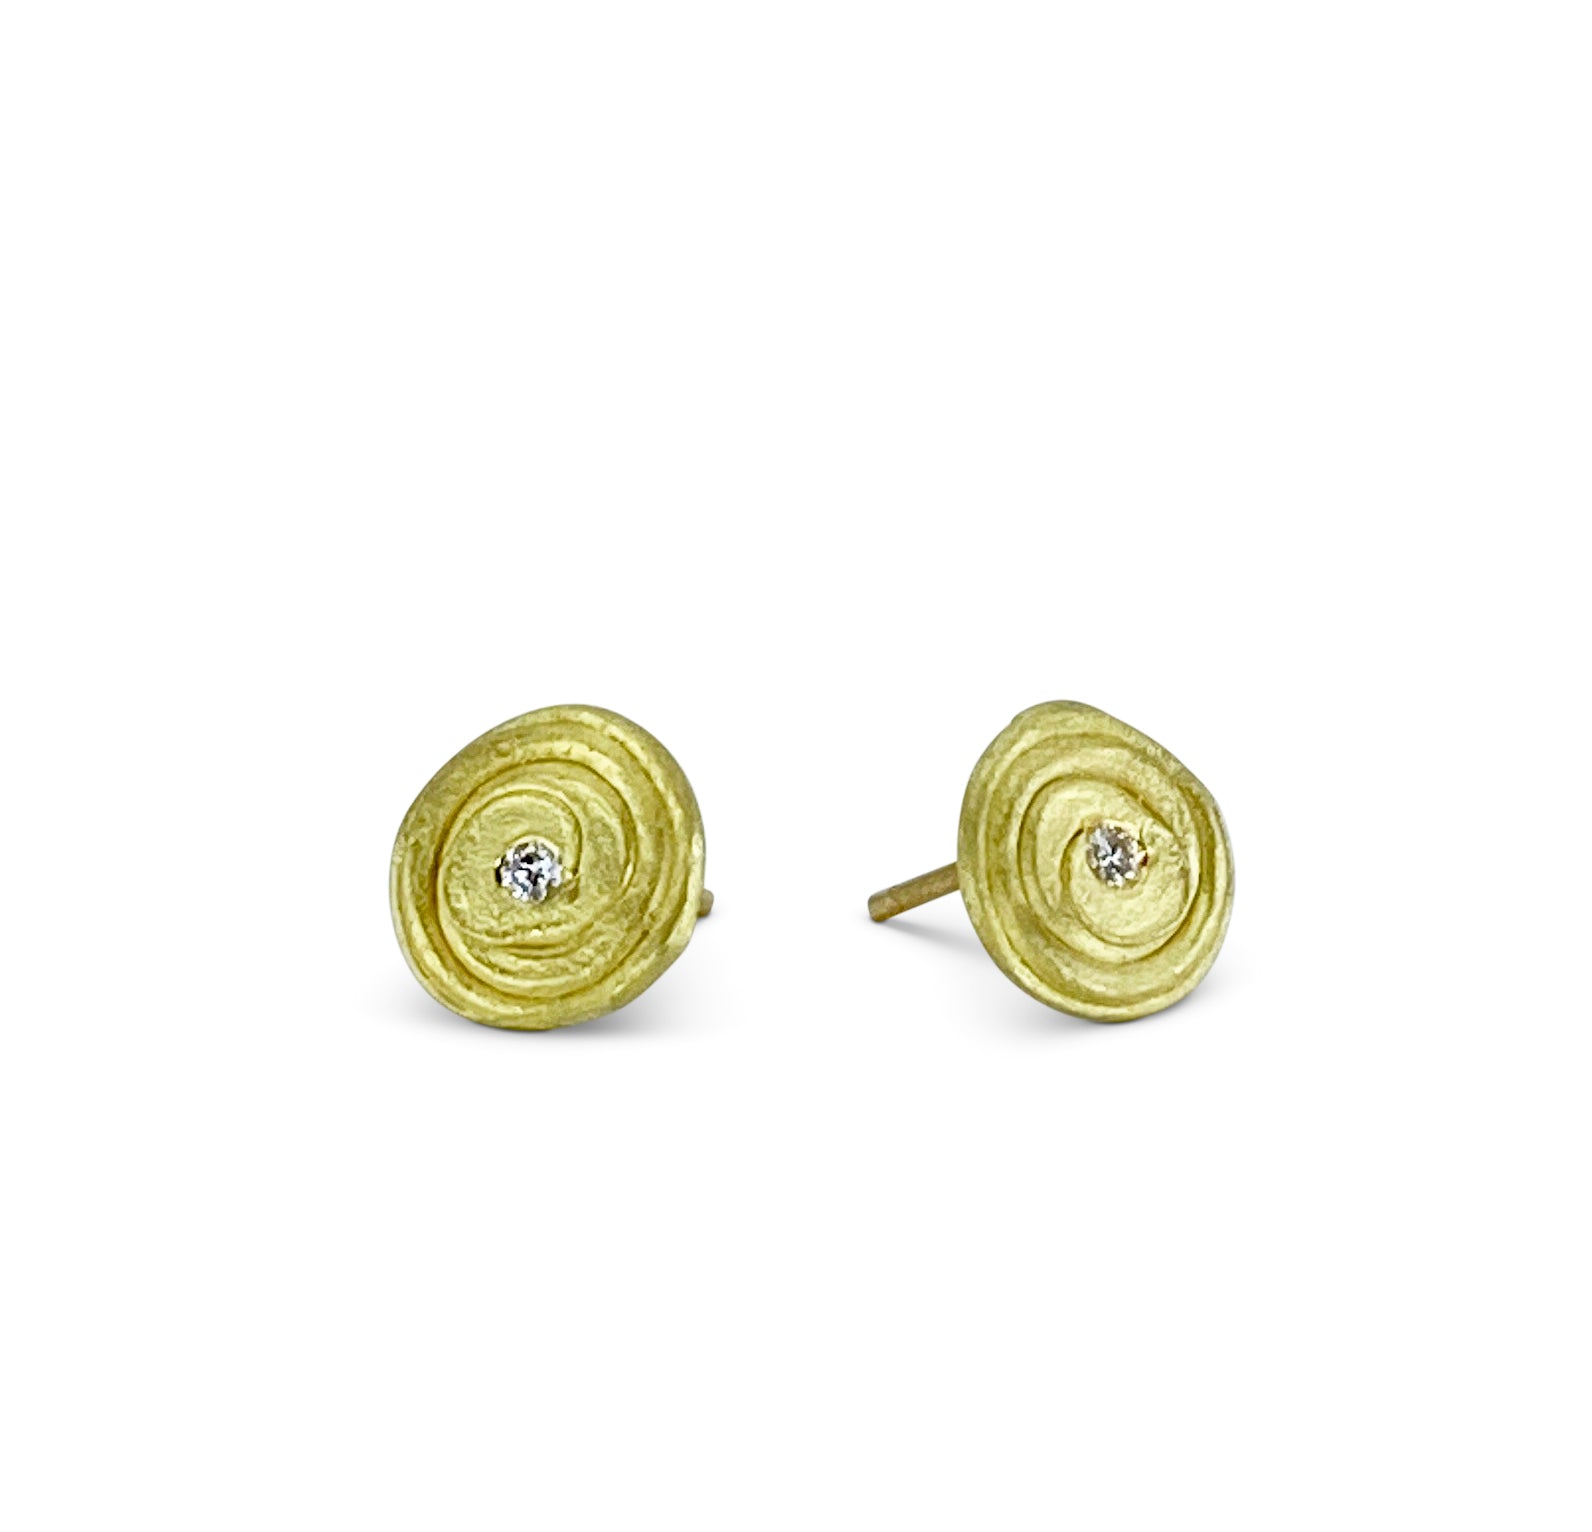 Spiral earrings in 18k yellow gold with diamonds made by Ayesha Mayadas